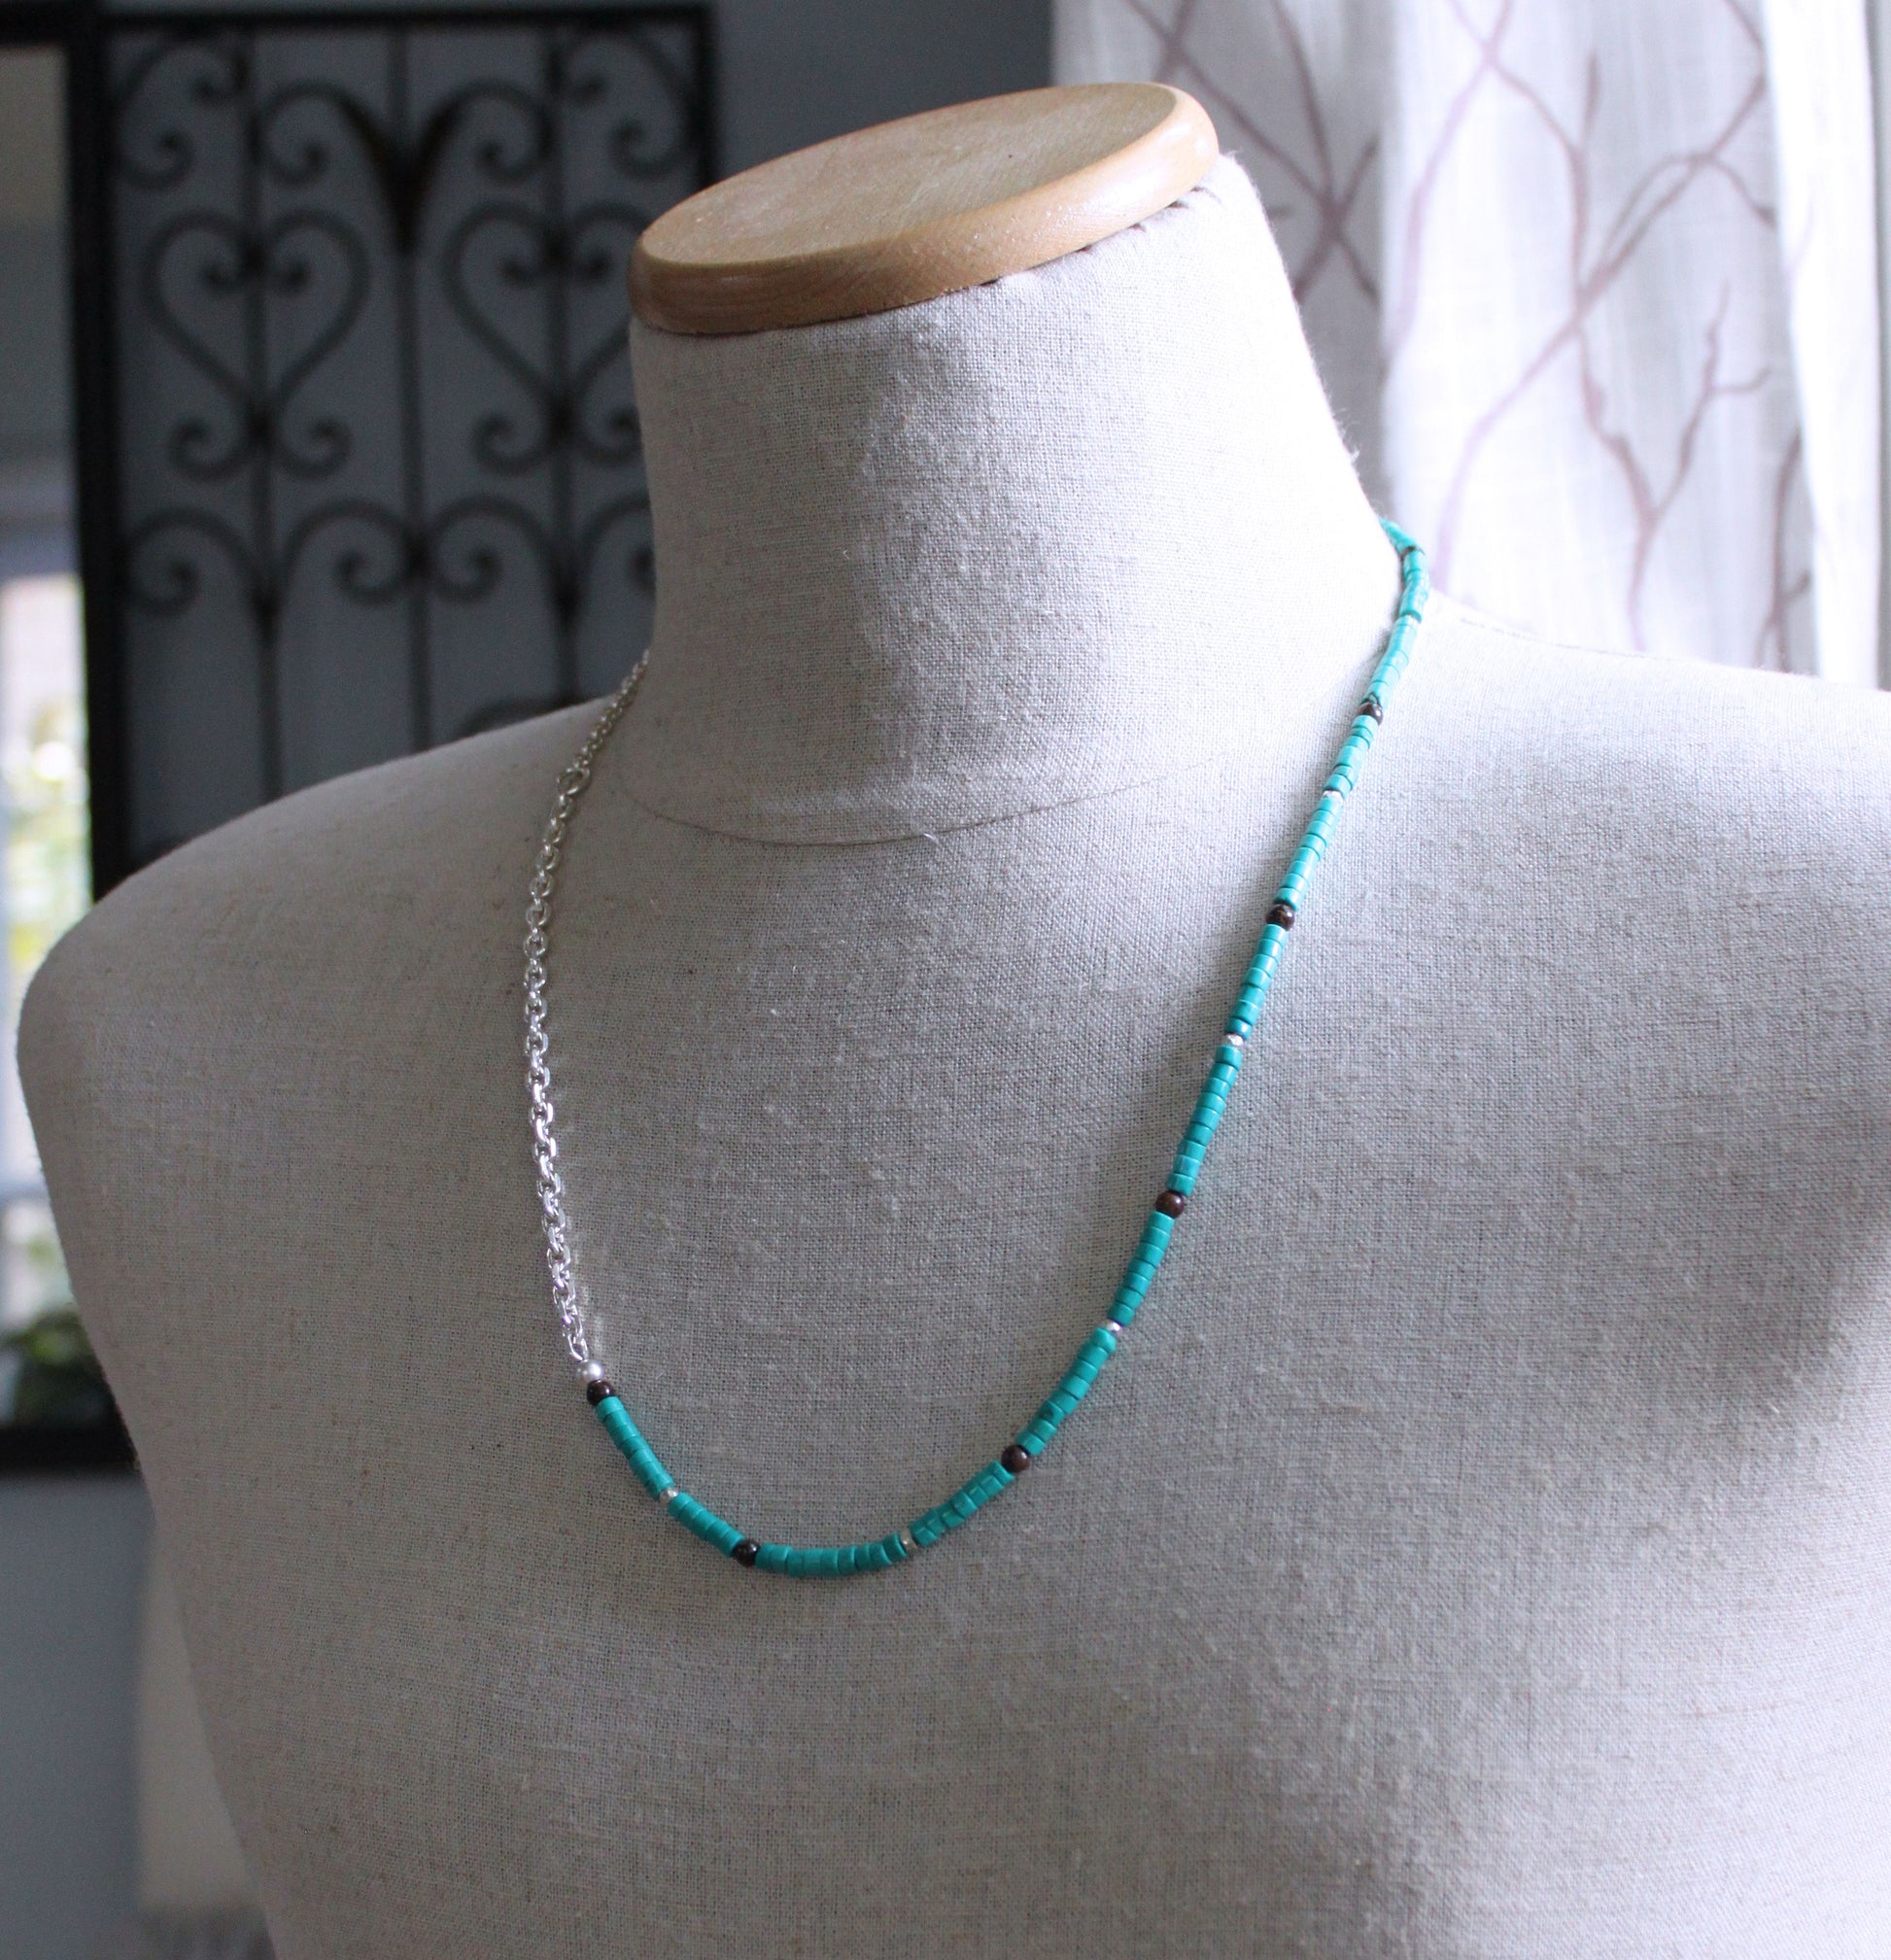 Men's bead and chain necklace